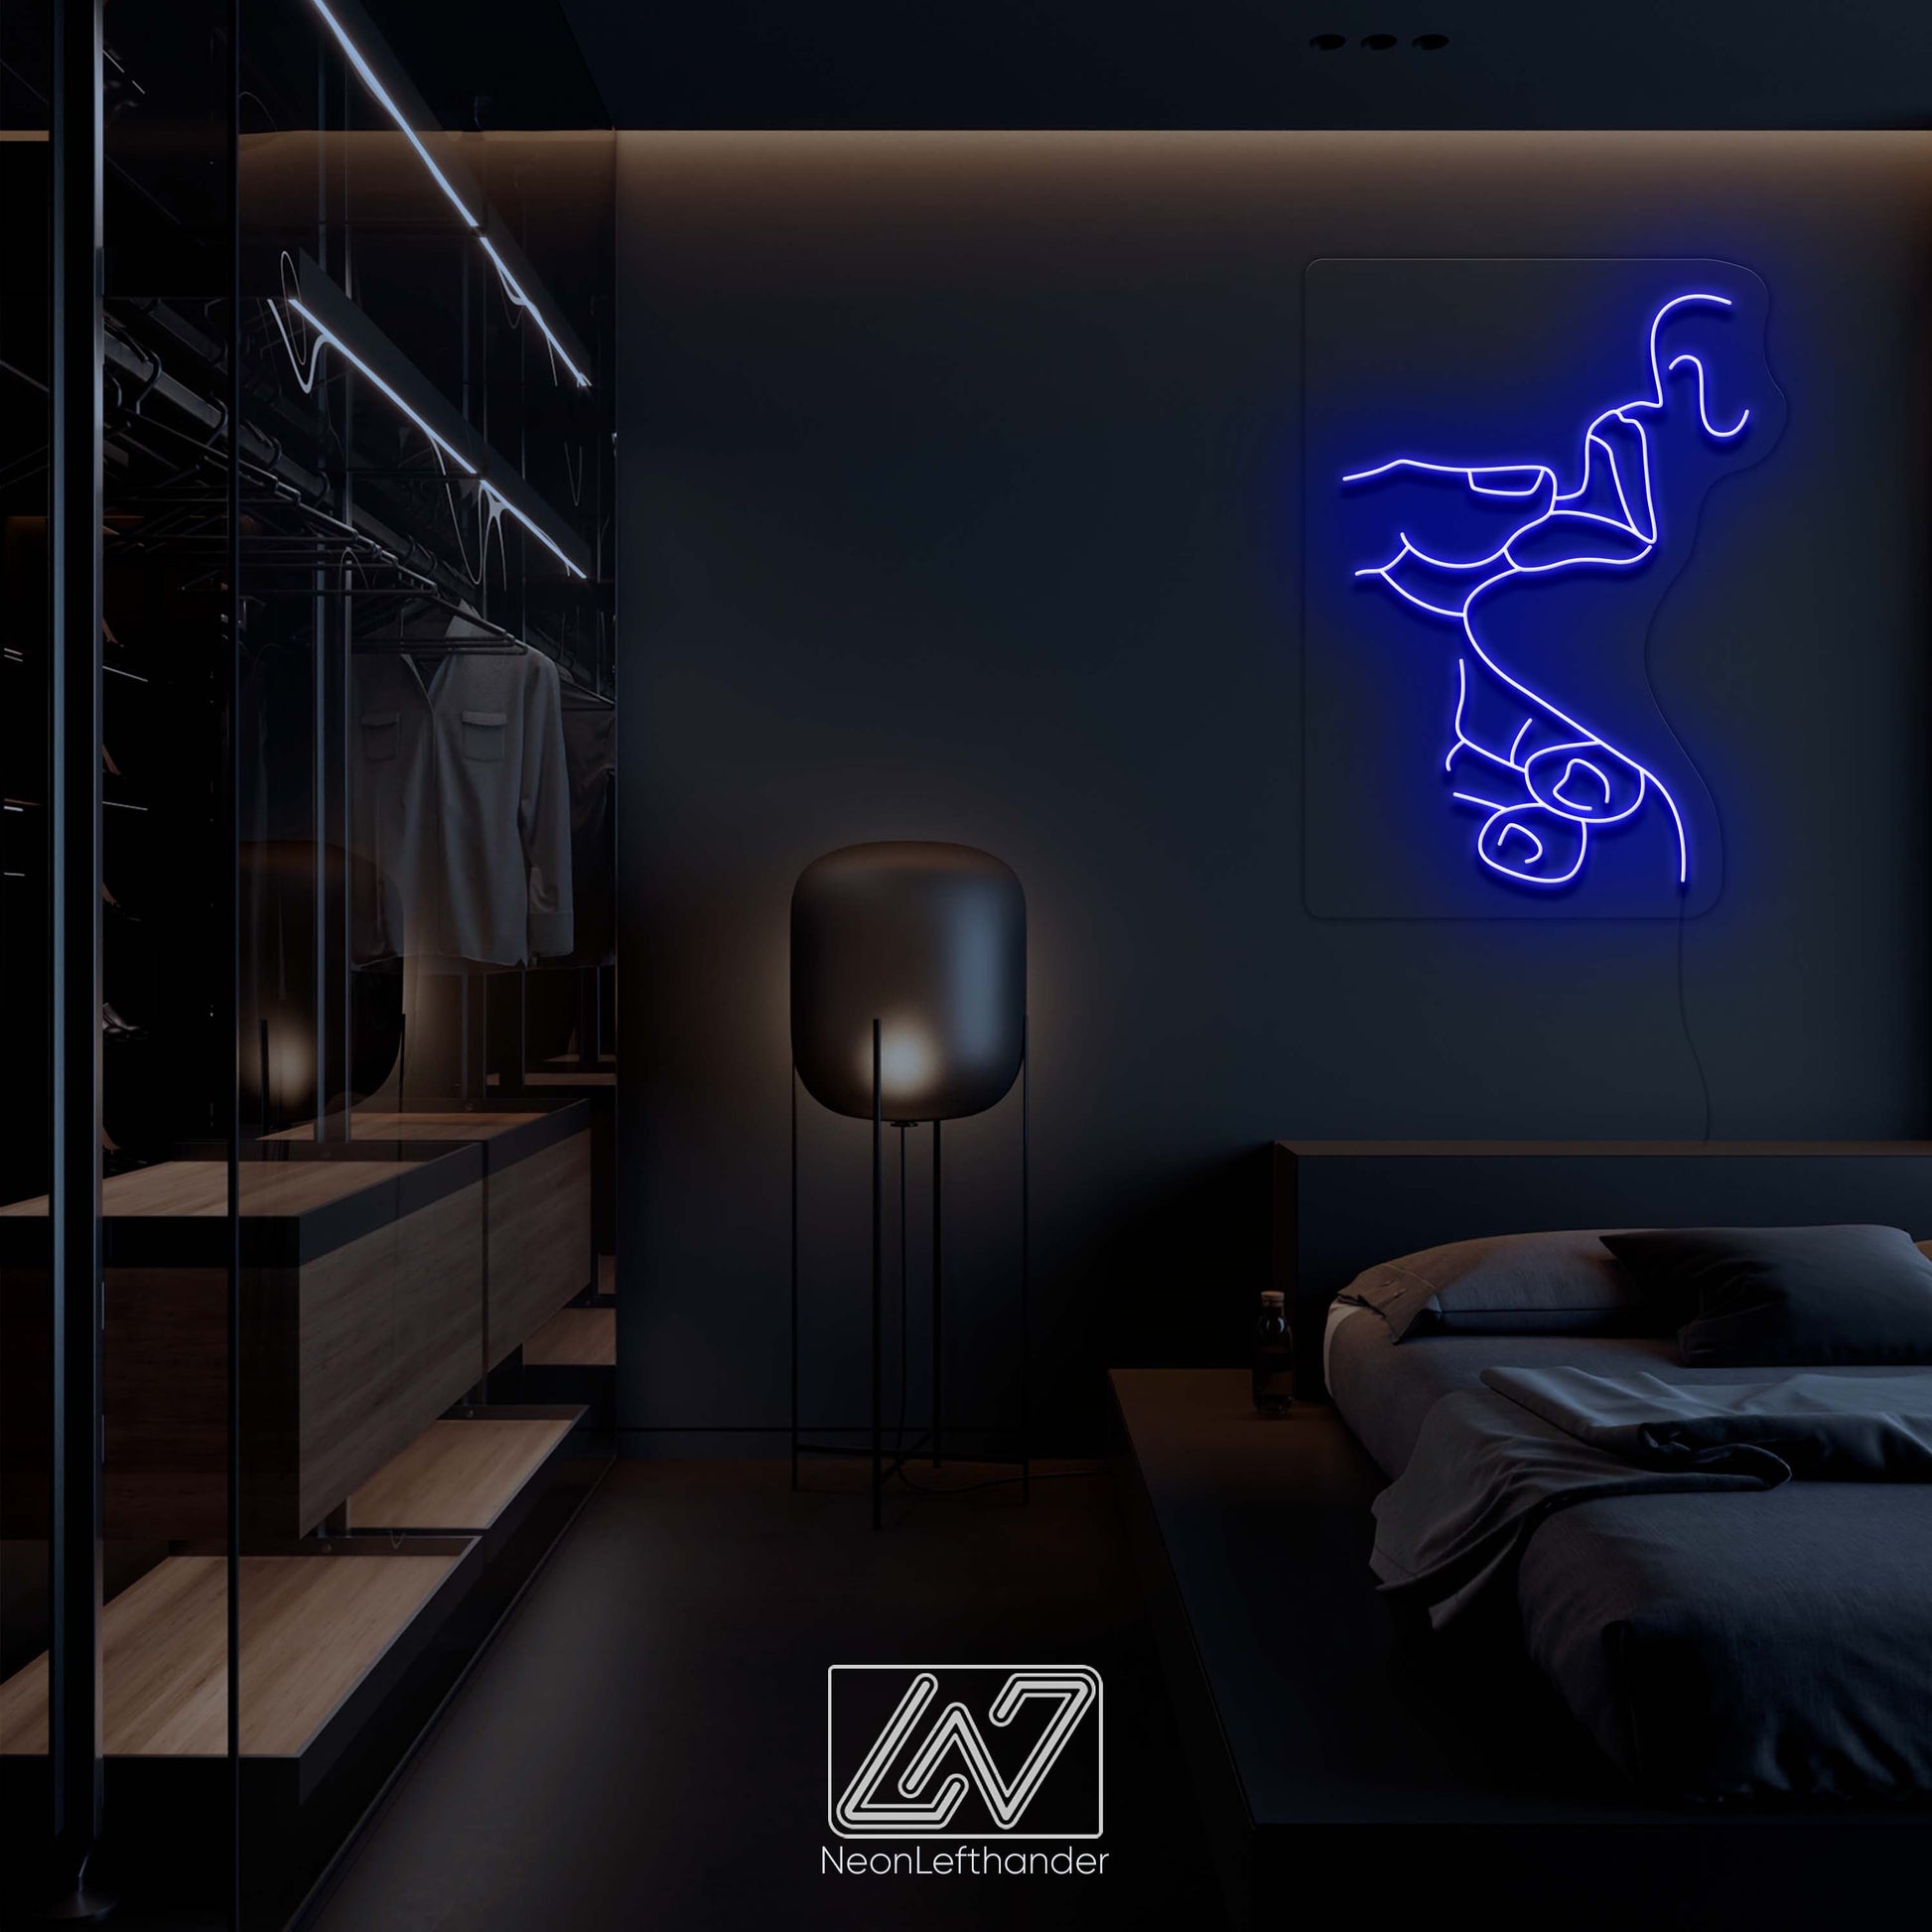 Passion - LED Neon Sign, Custom Sexy Woman Bedroom Party Bar Wall Room Decor LED Lady Neon light Wedding Personalized romance